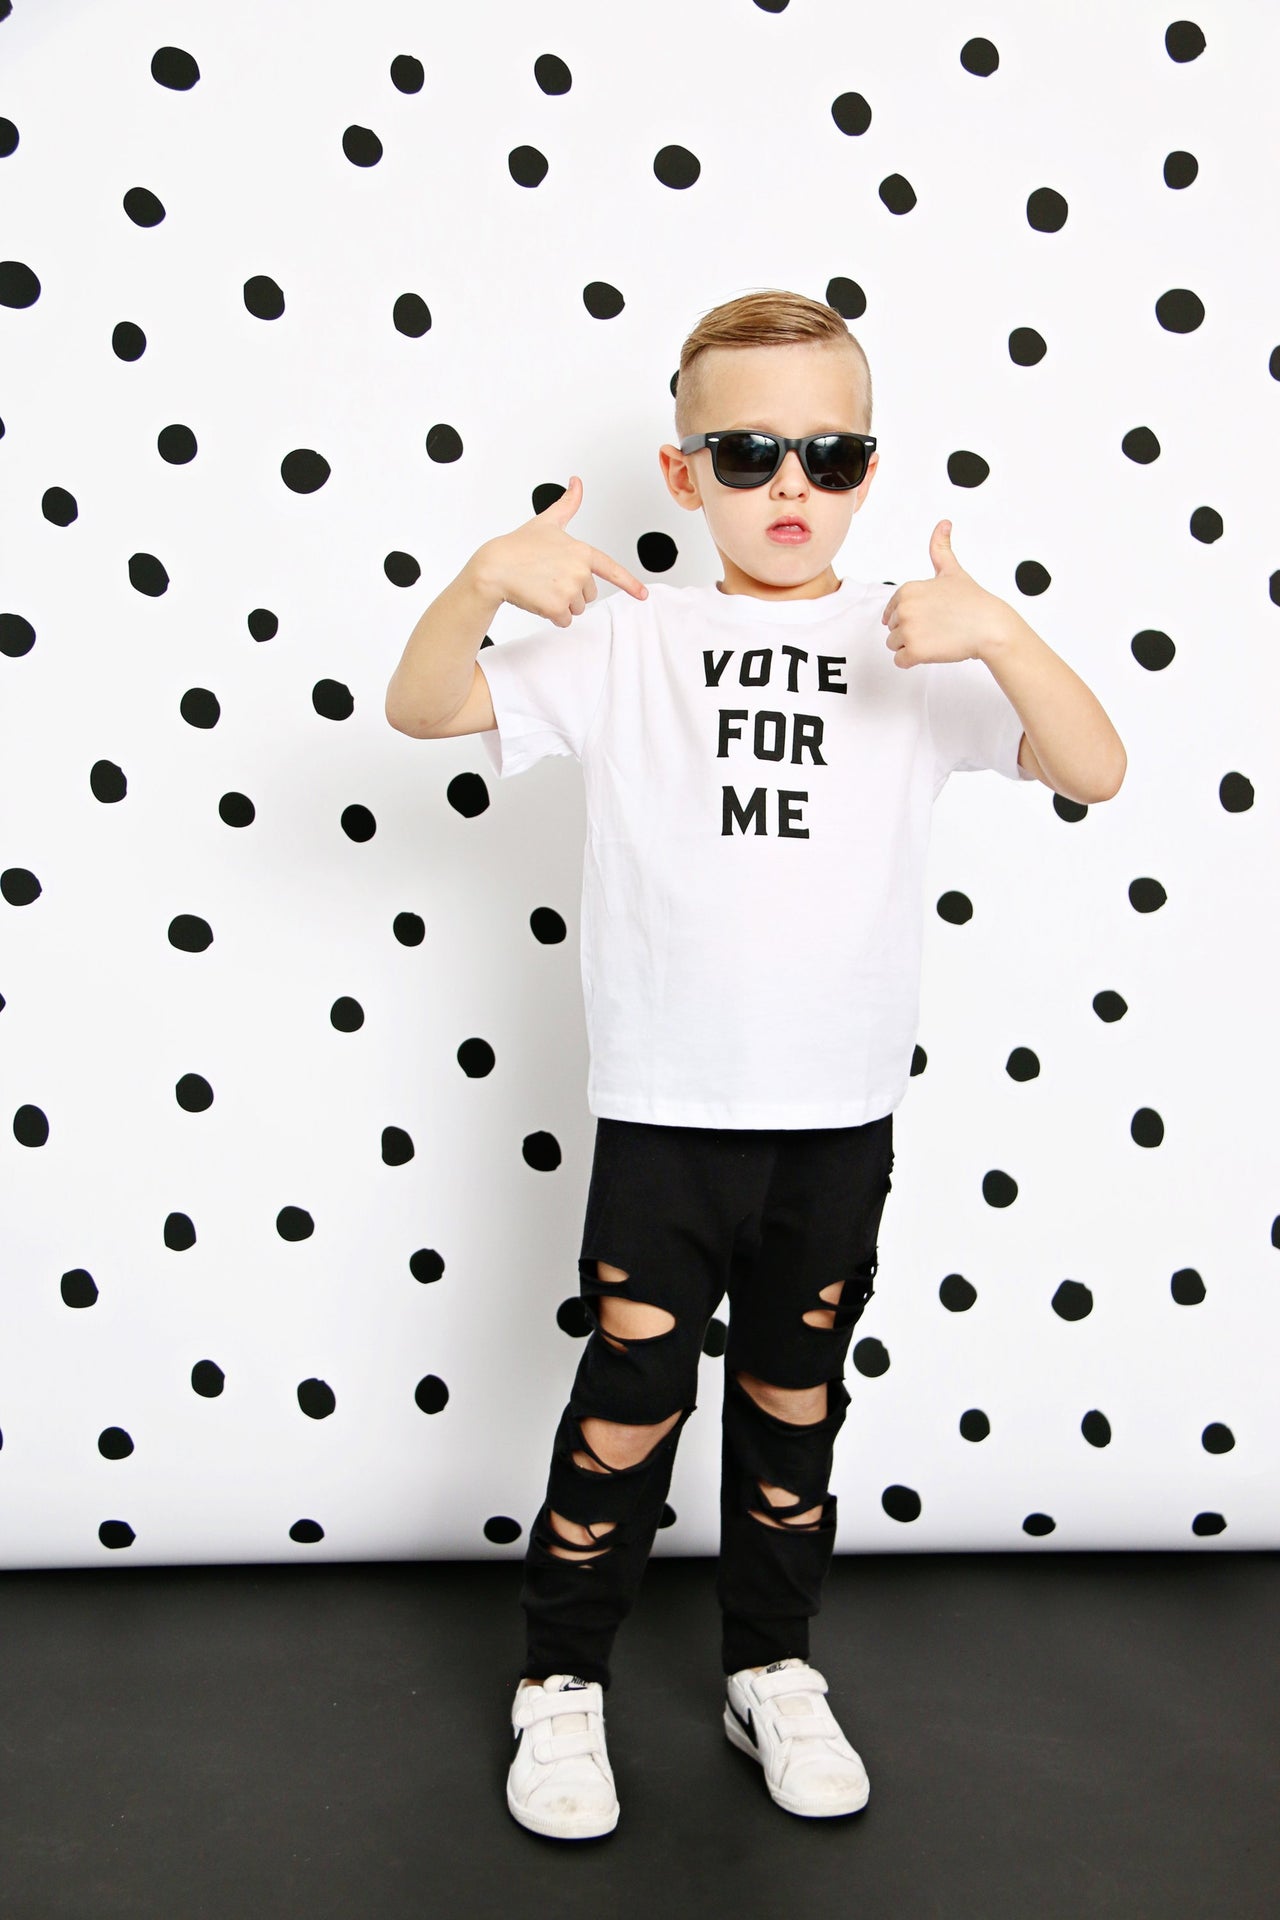 LOVE BUBBY VOTE FOR ME T-SHIRT